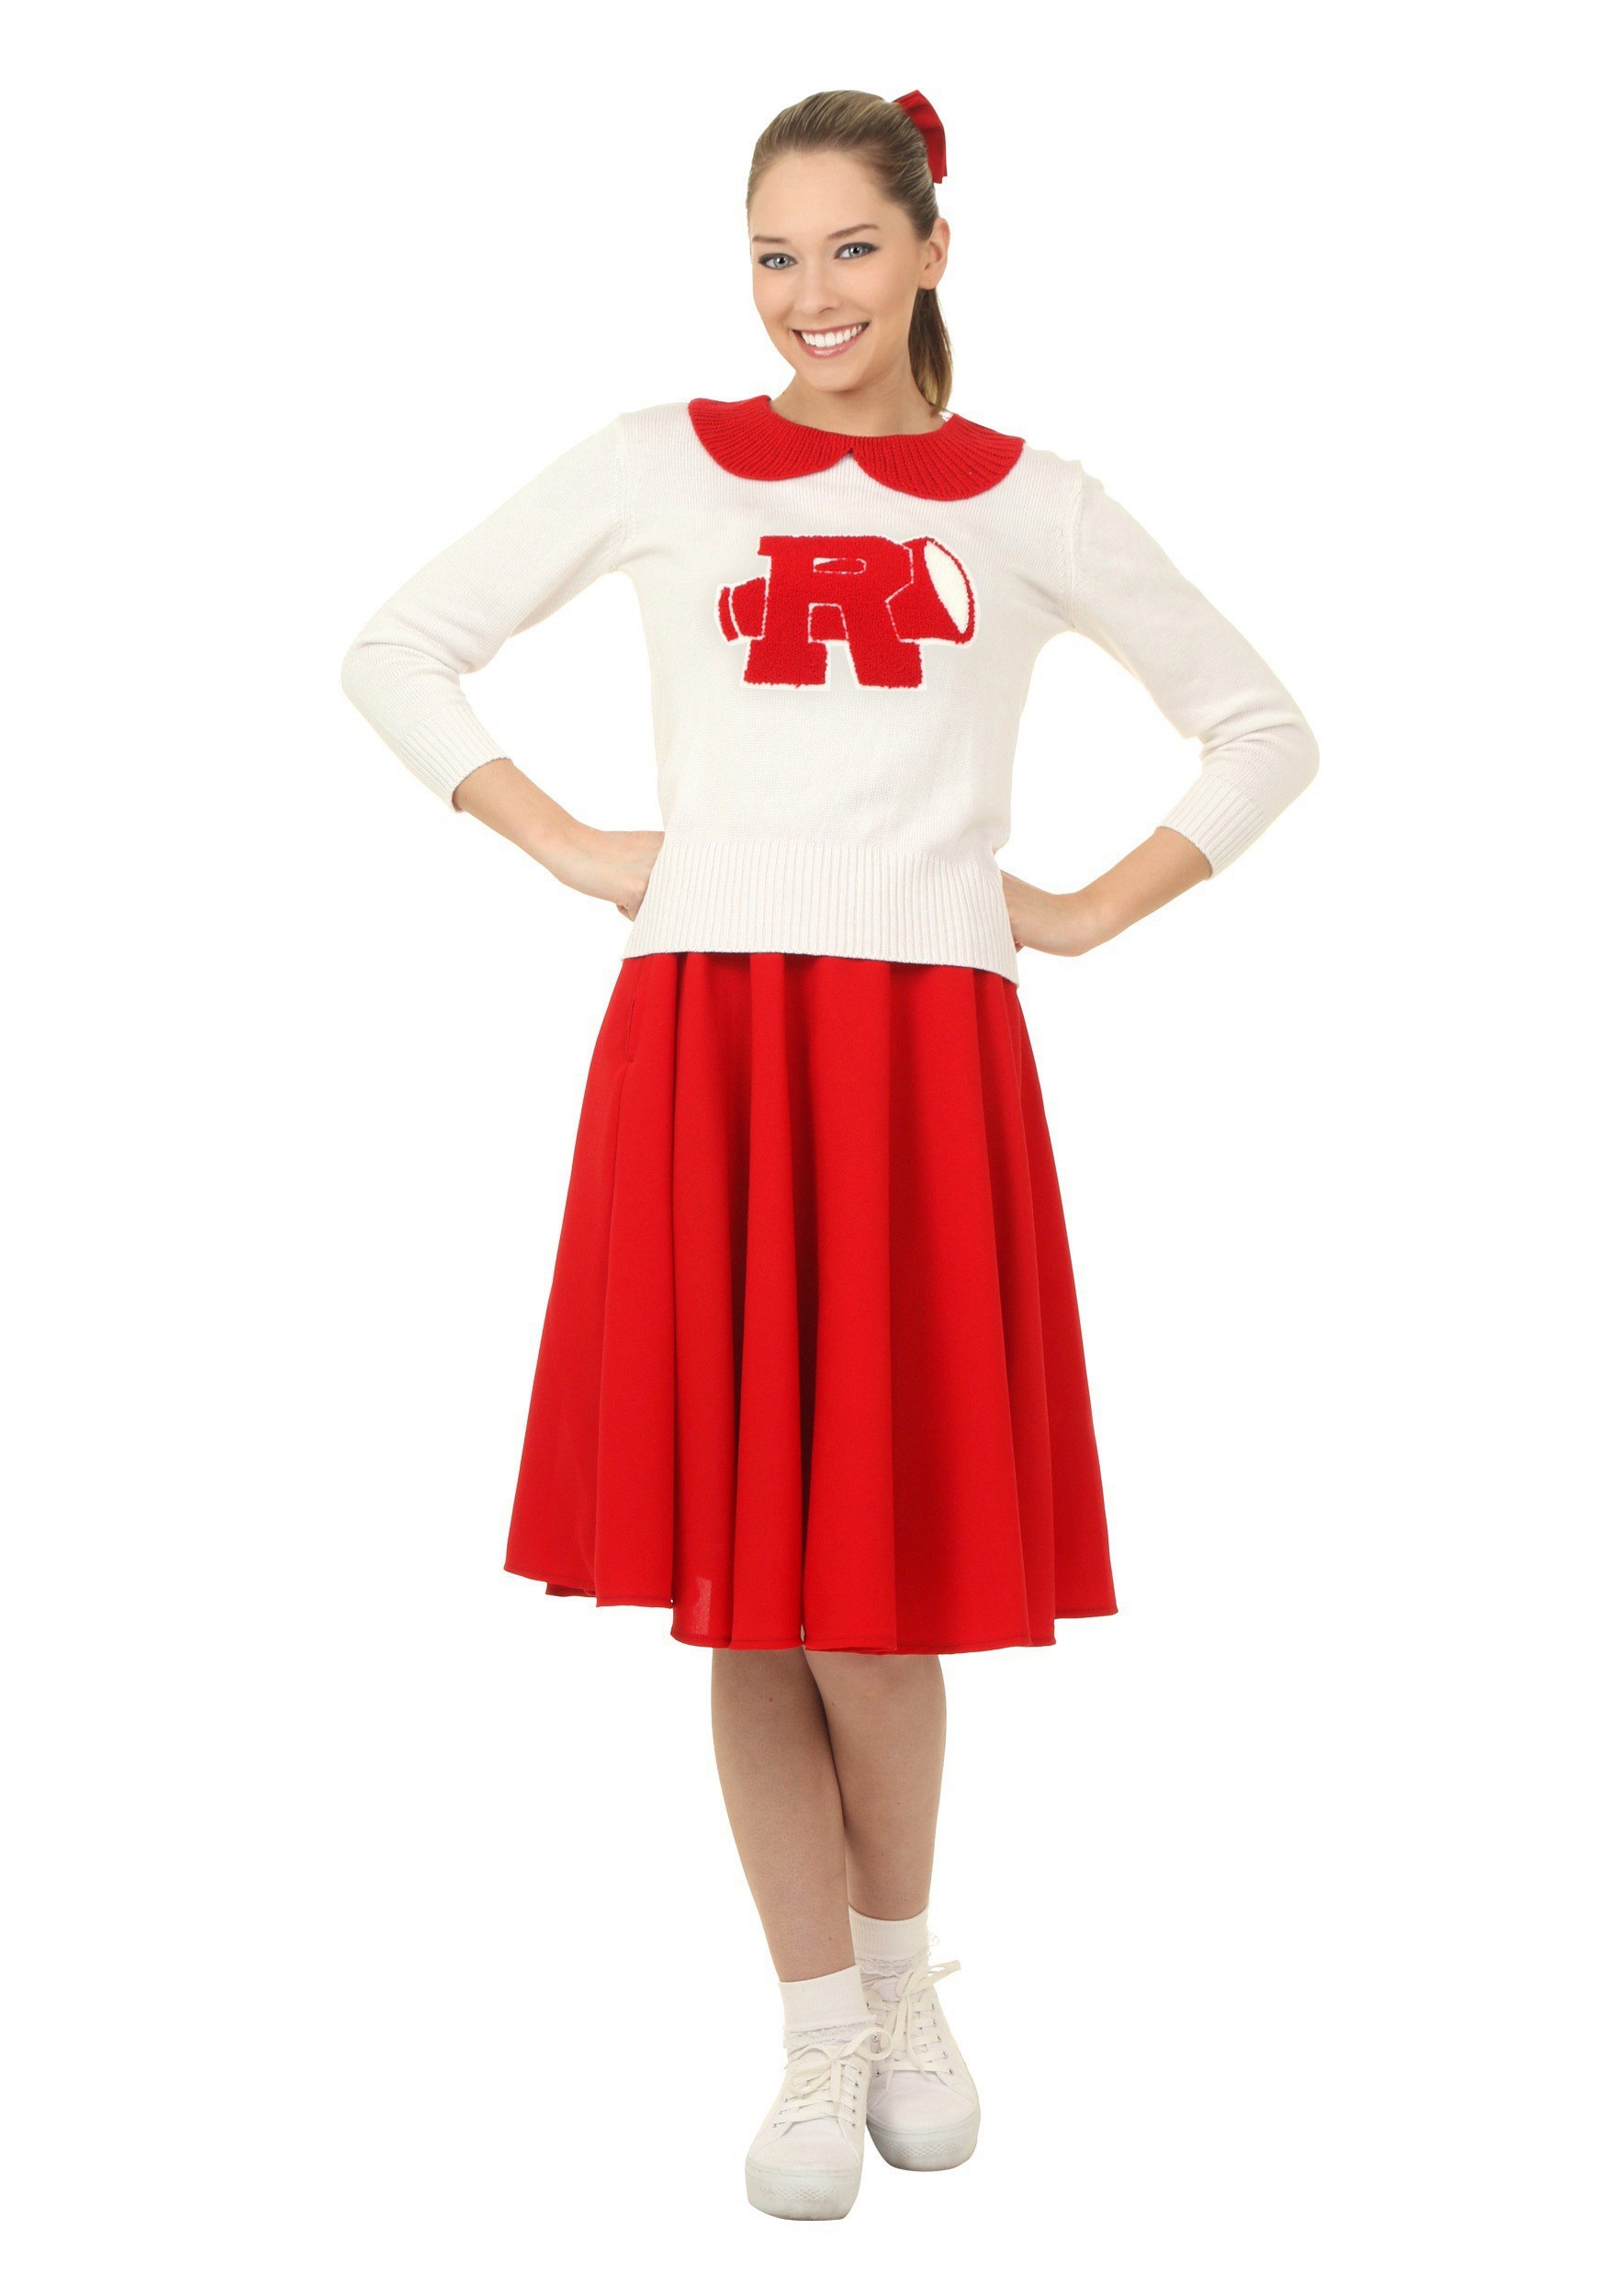 Grease Rydell High Cheerleader Plus Size Costume for Women